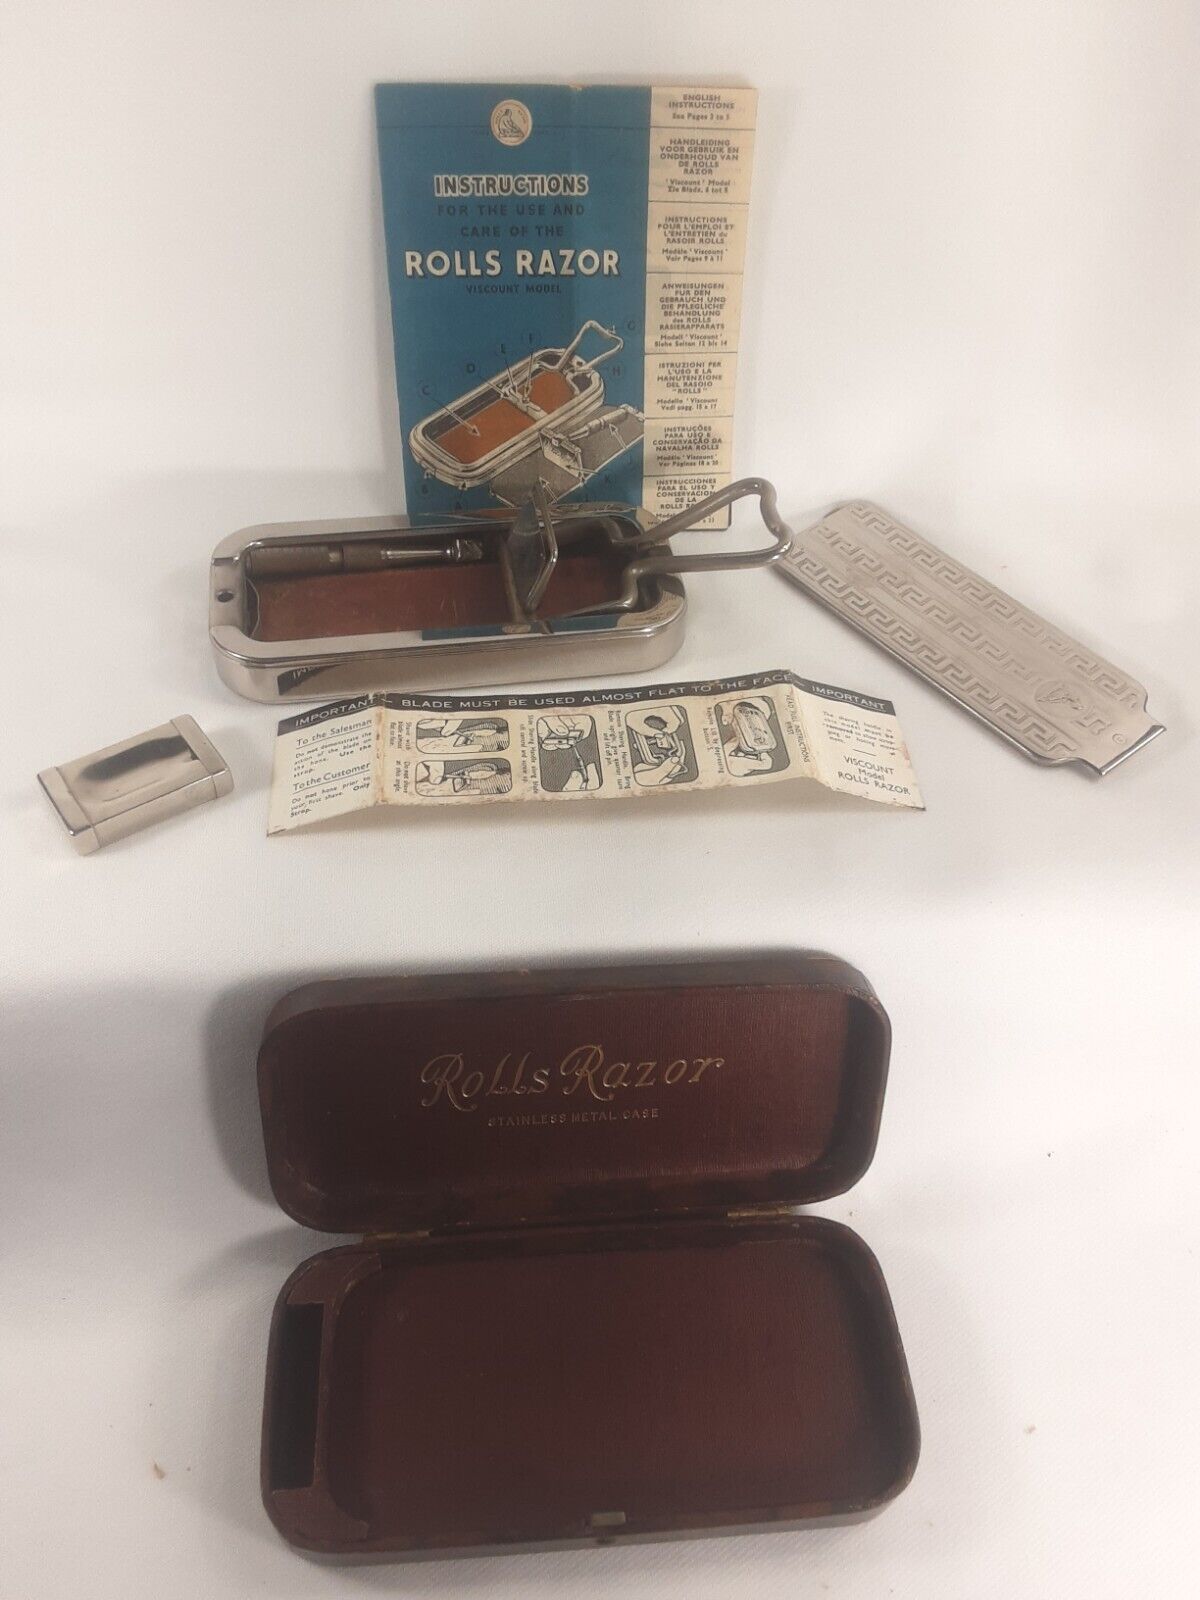 Rolls Razor No. 3 Imperial With Leather Bound Case Instructions and Booklet Rare